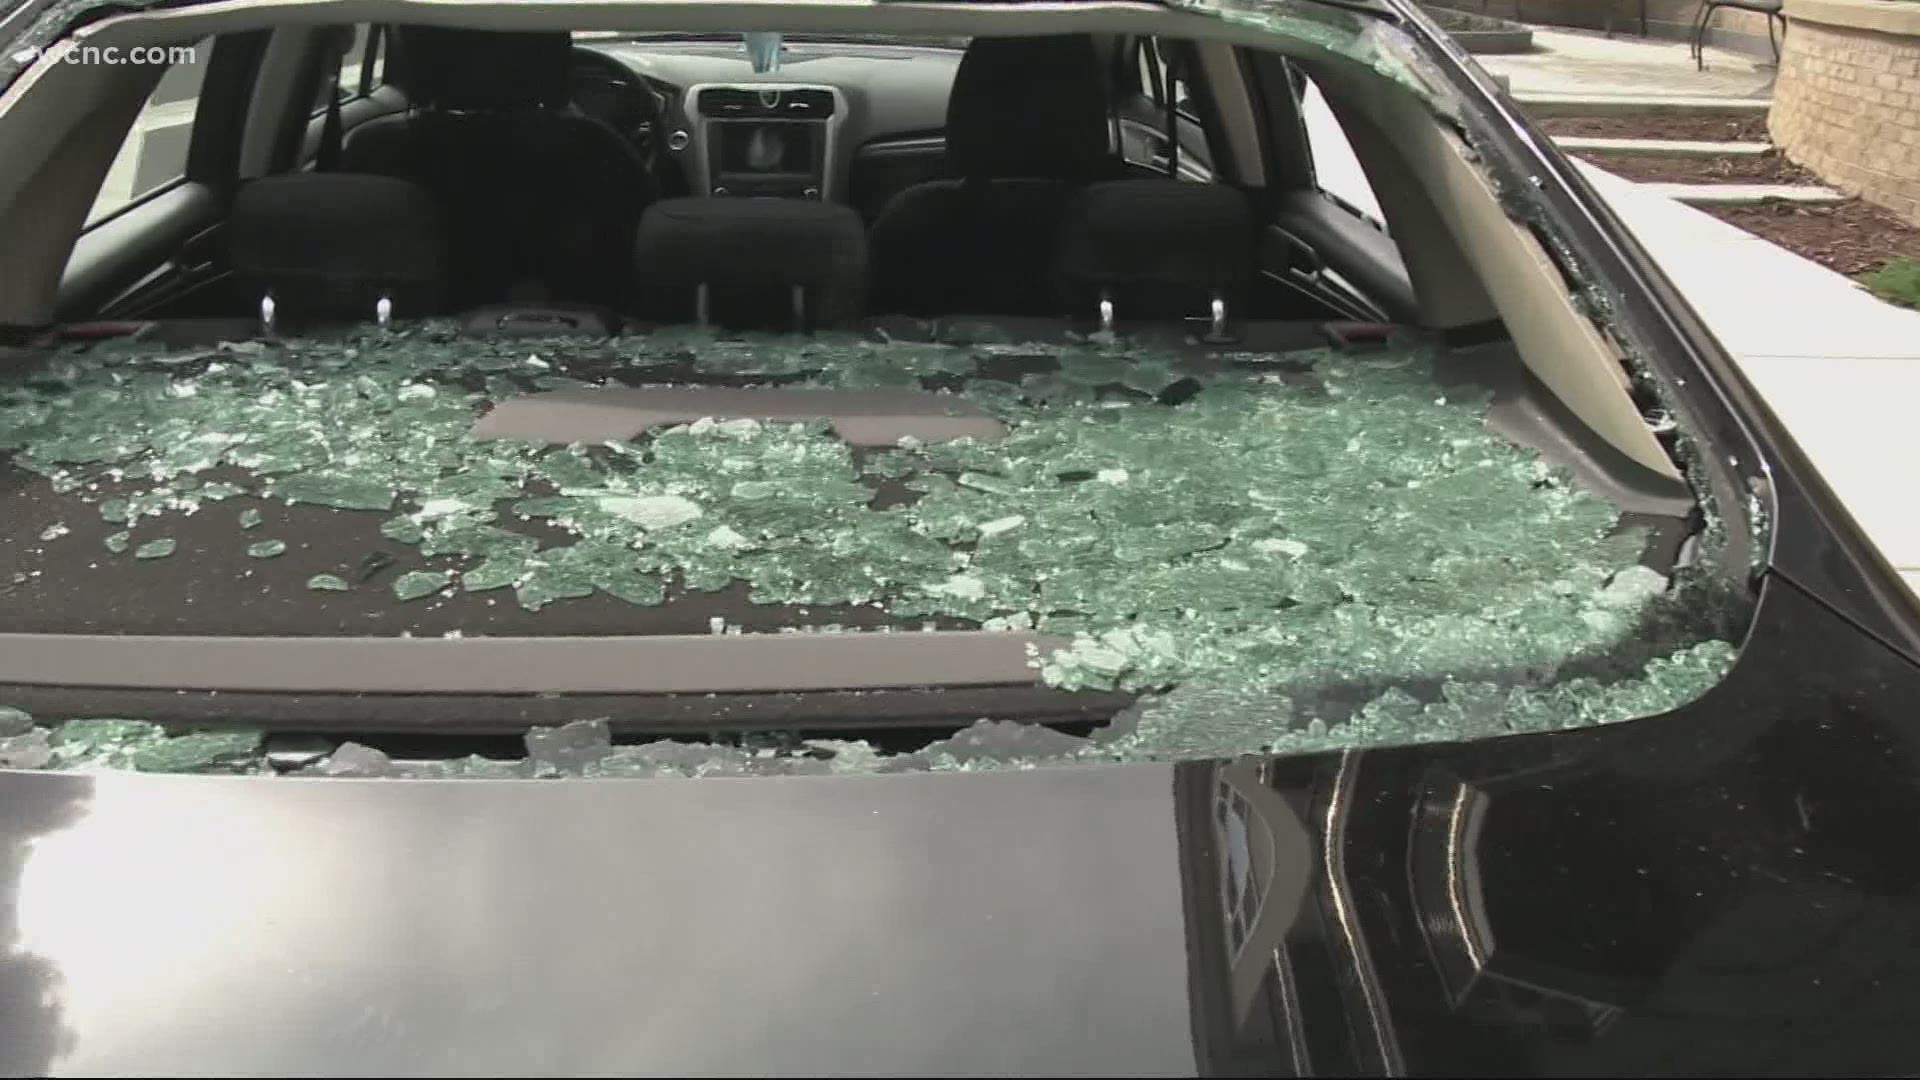 CMPS is investigating a string of car break-ins in the city of Charlotte.